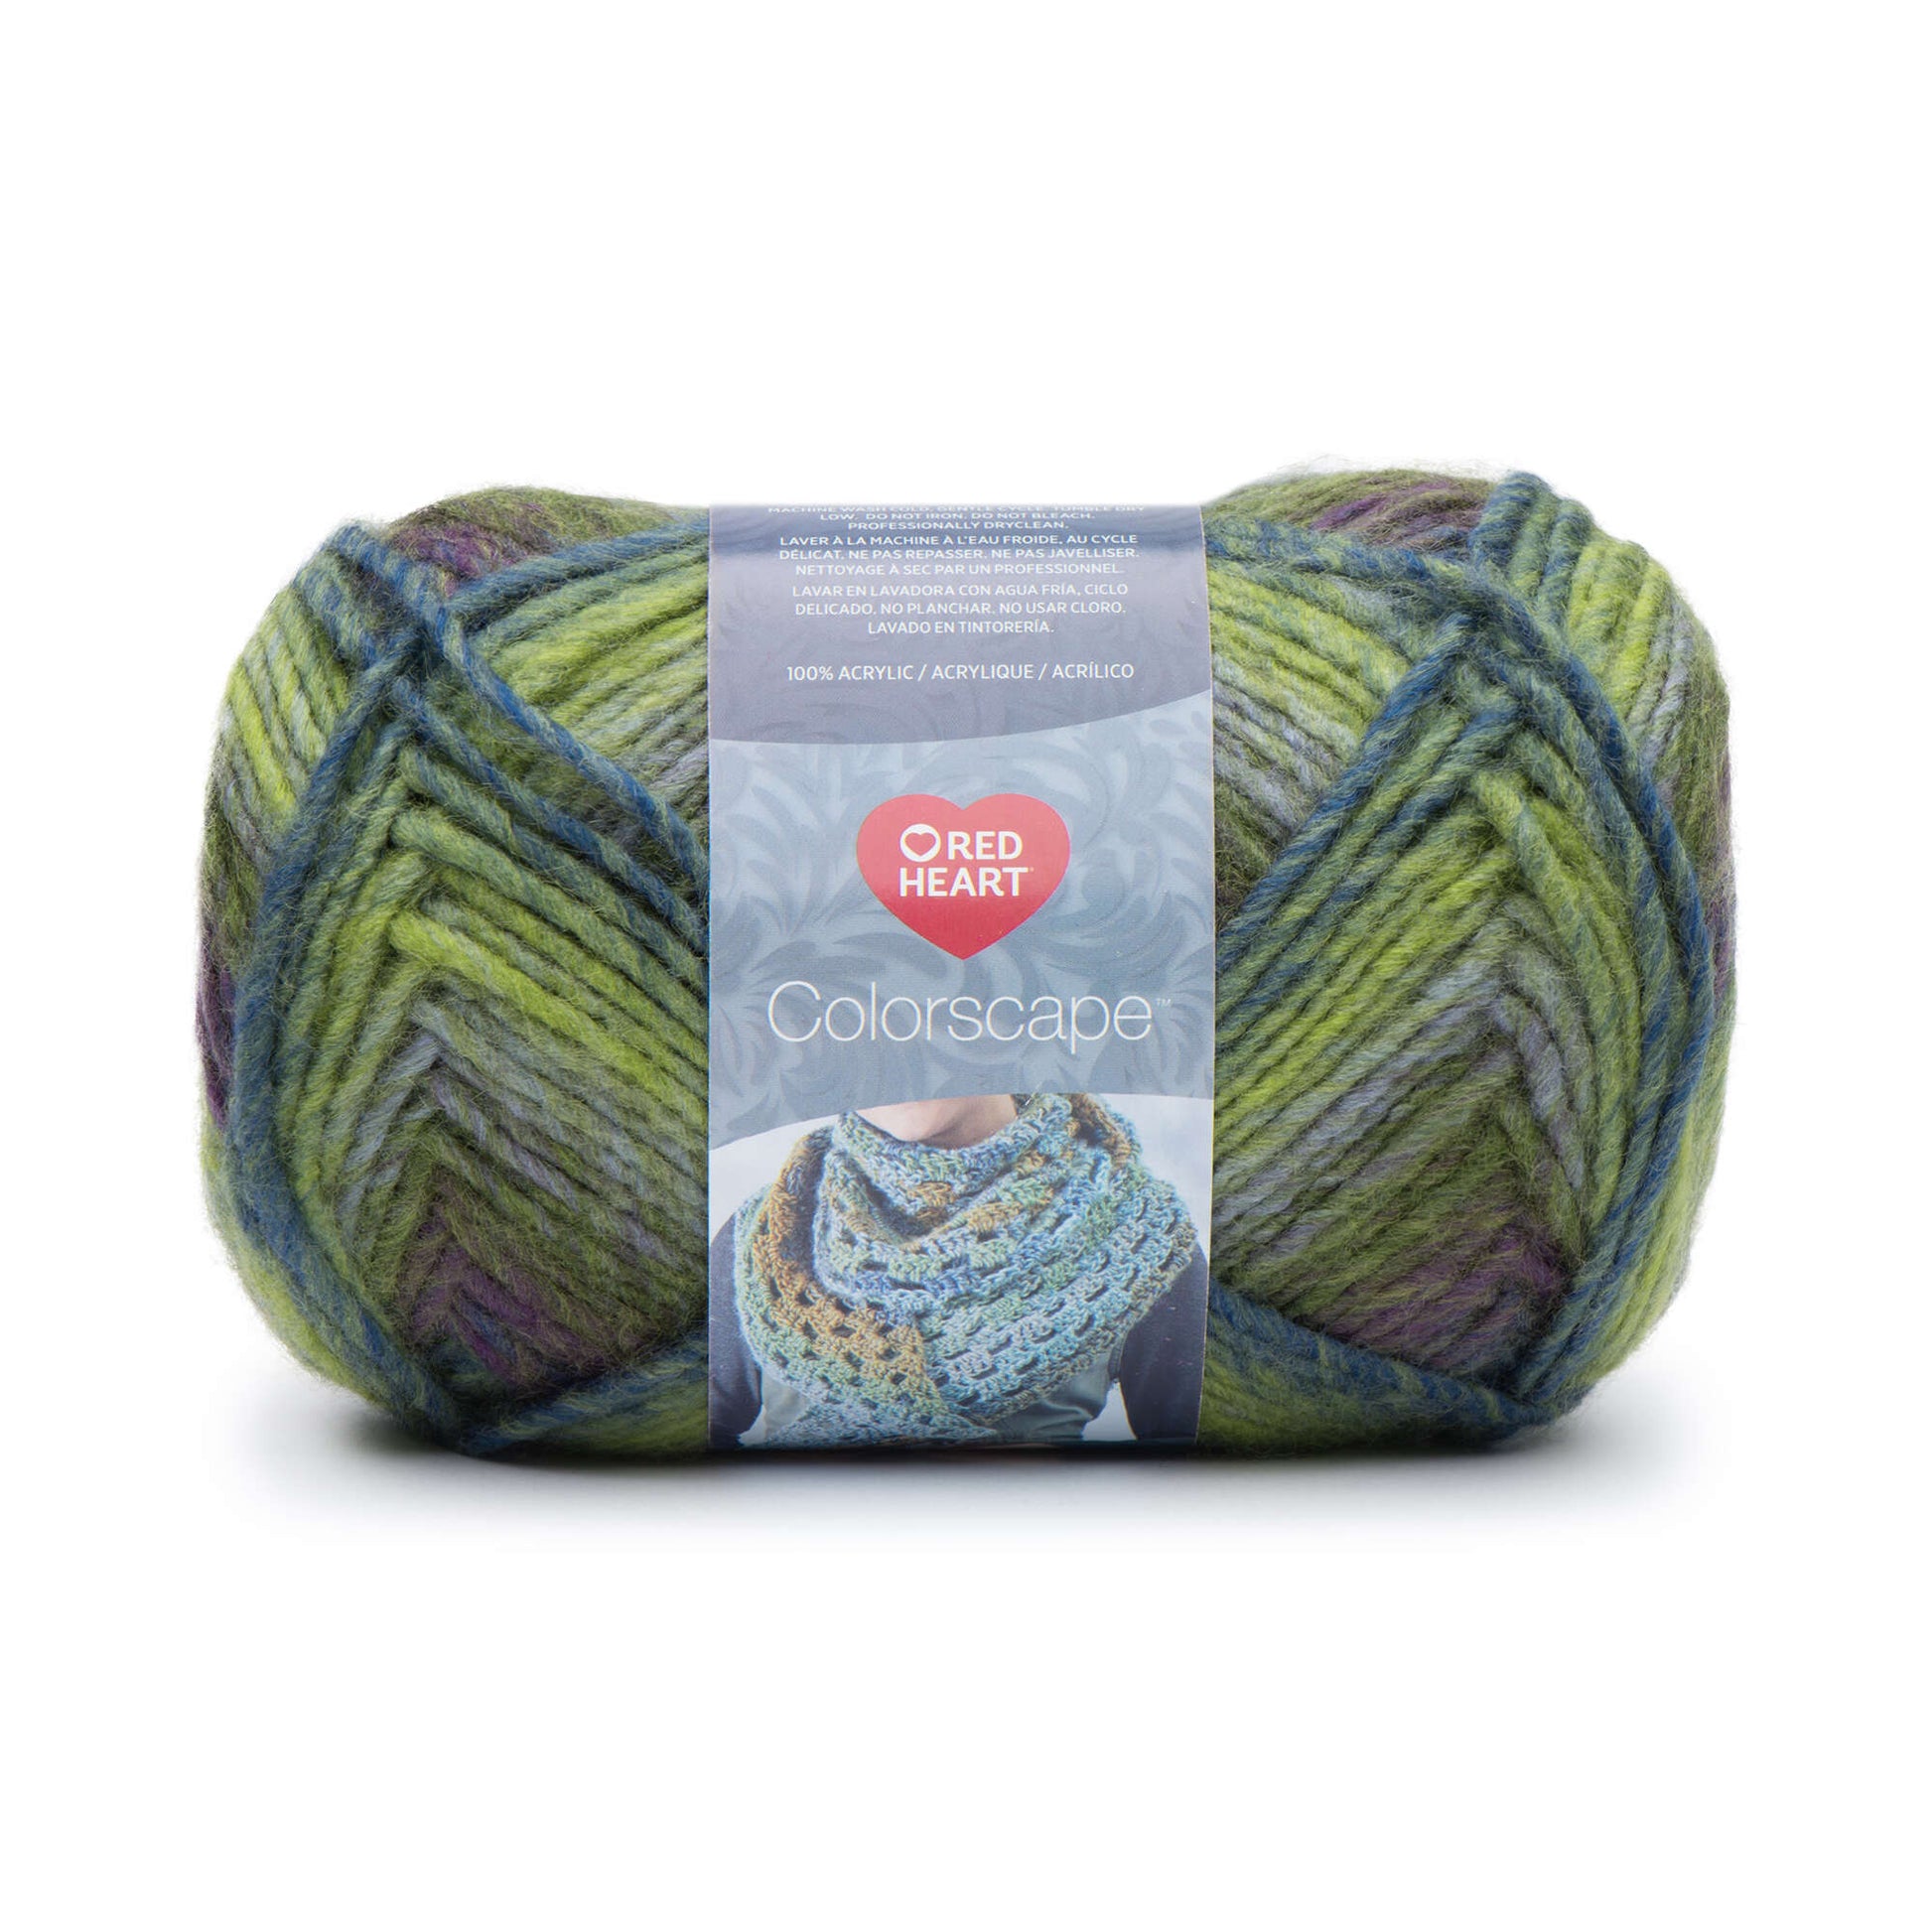 Red Heart Colorscape Yarn - Discontinued shades Dublin